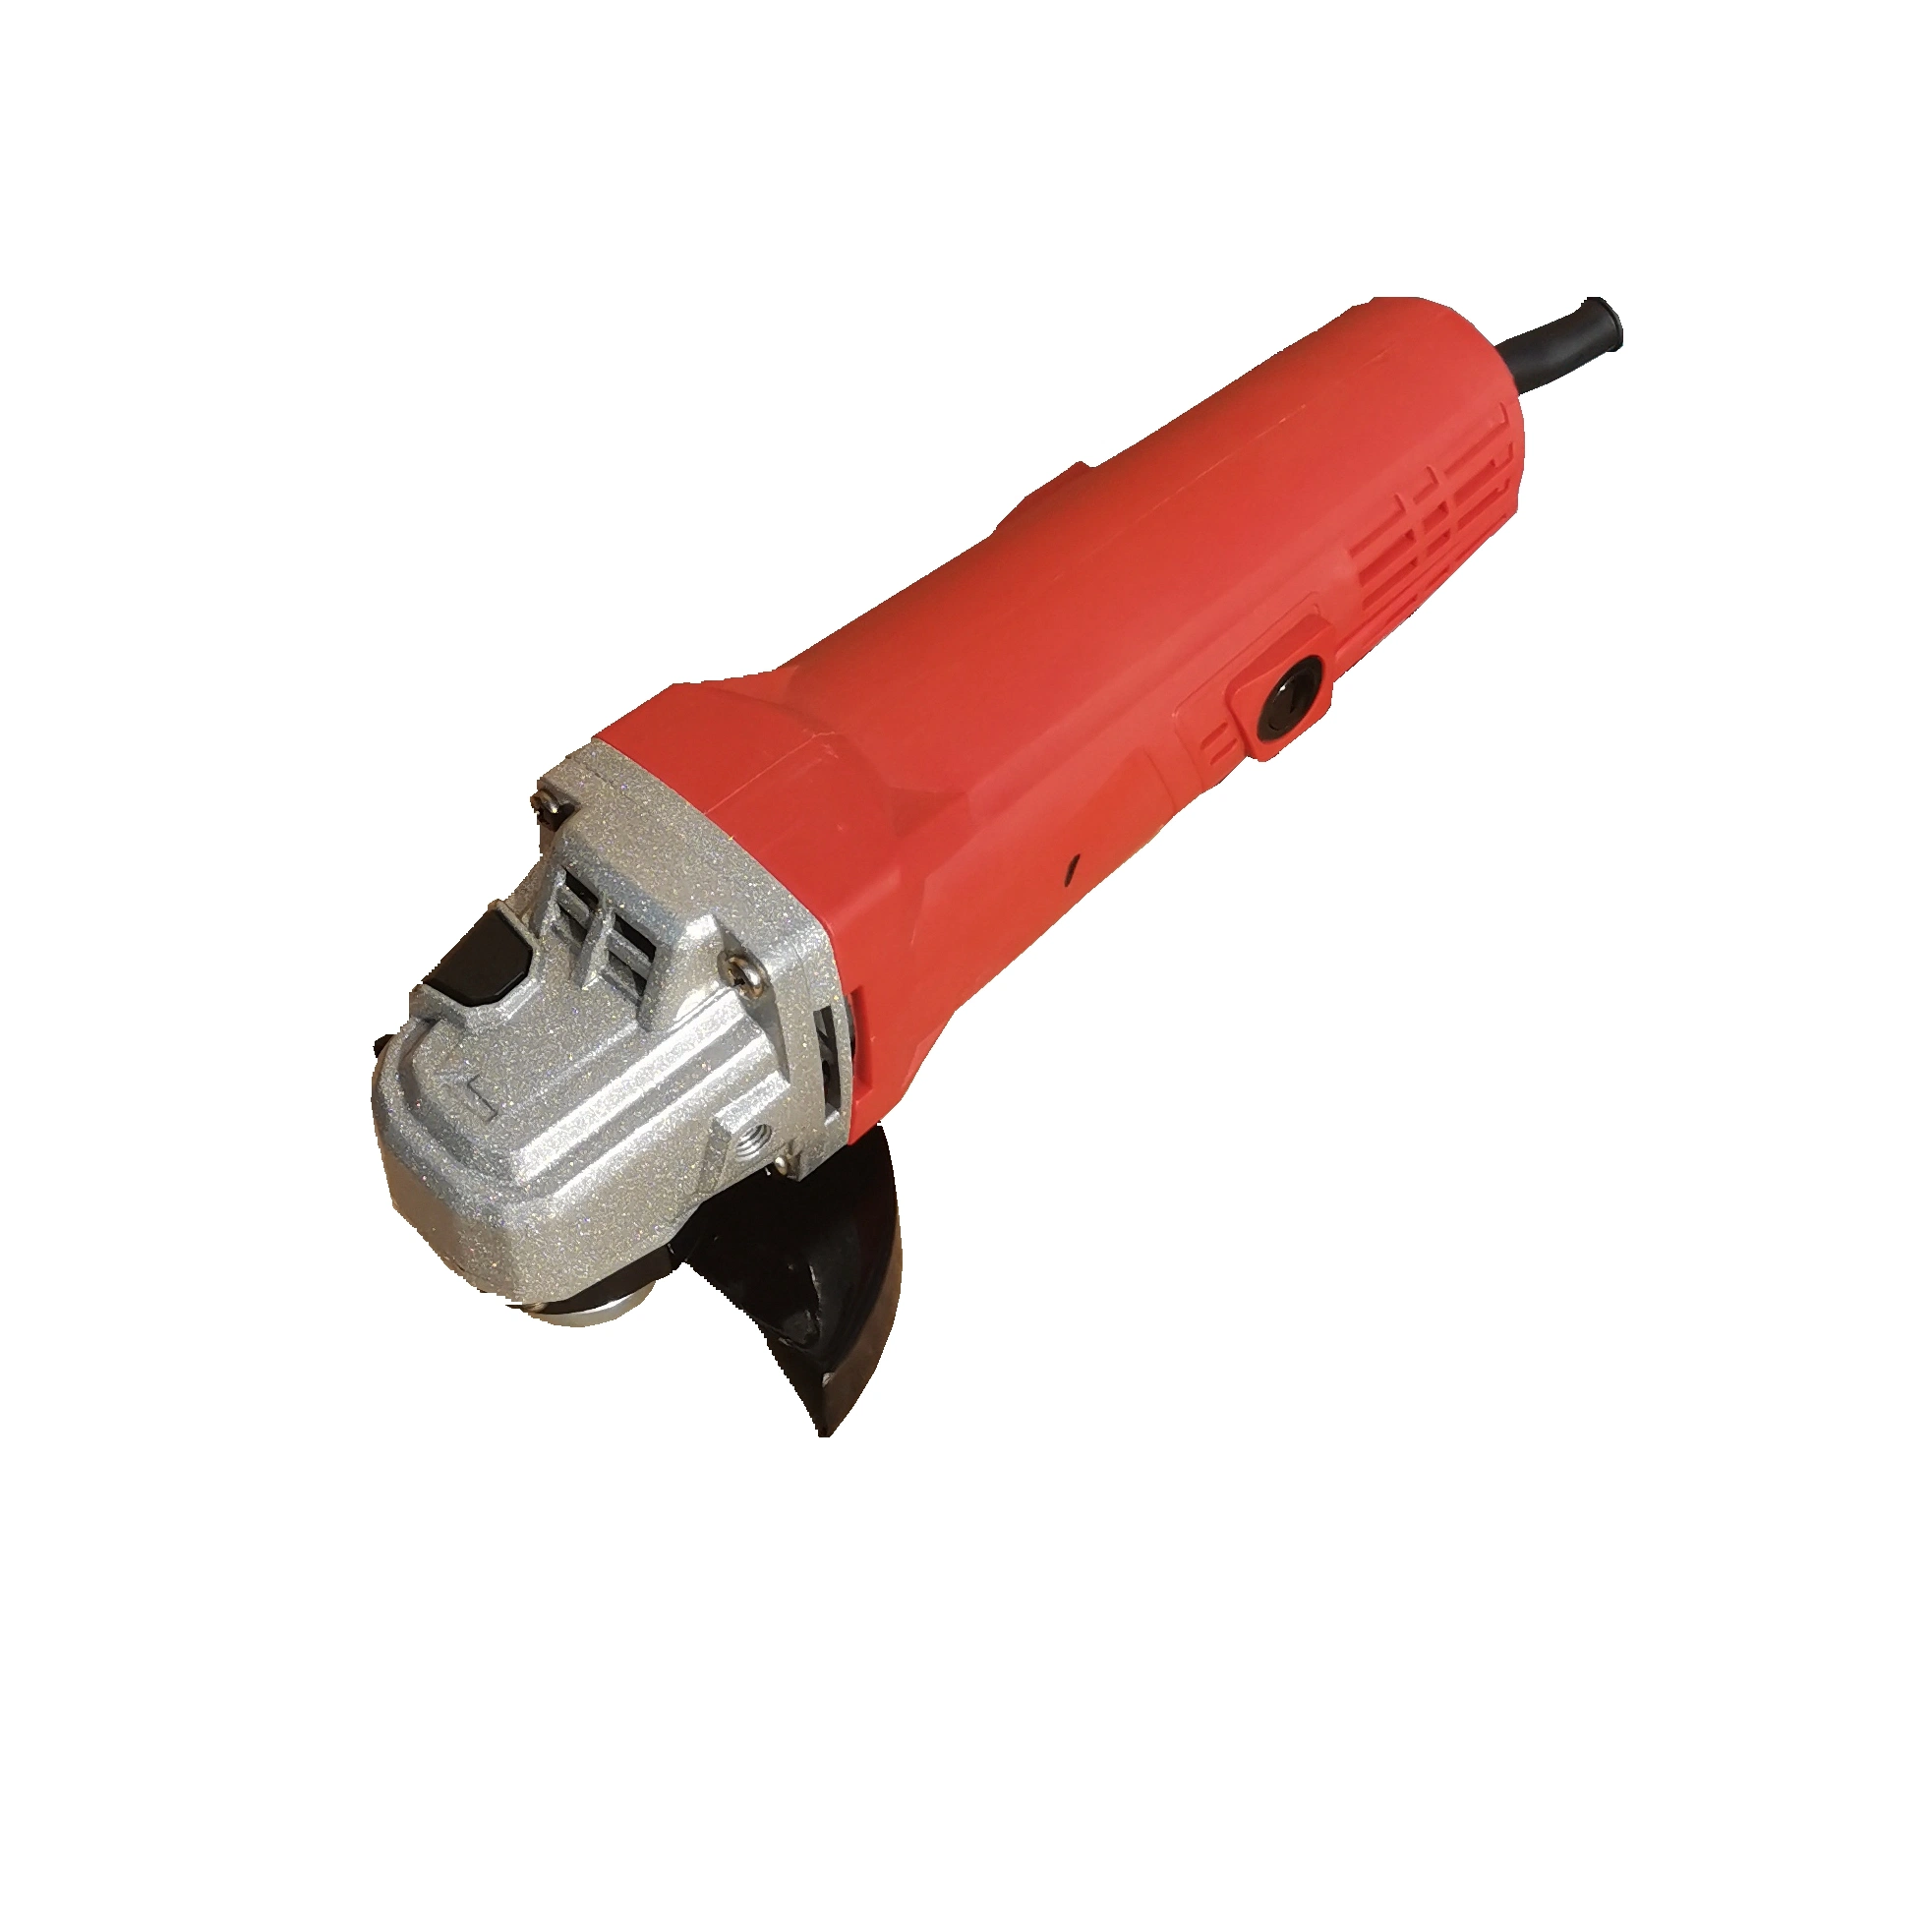 Professional Power Tools Manufacturer Supplied Cheap Hand Cutting Tool (MK9523)